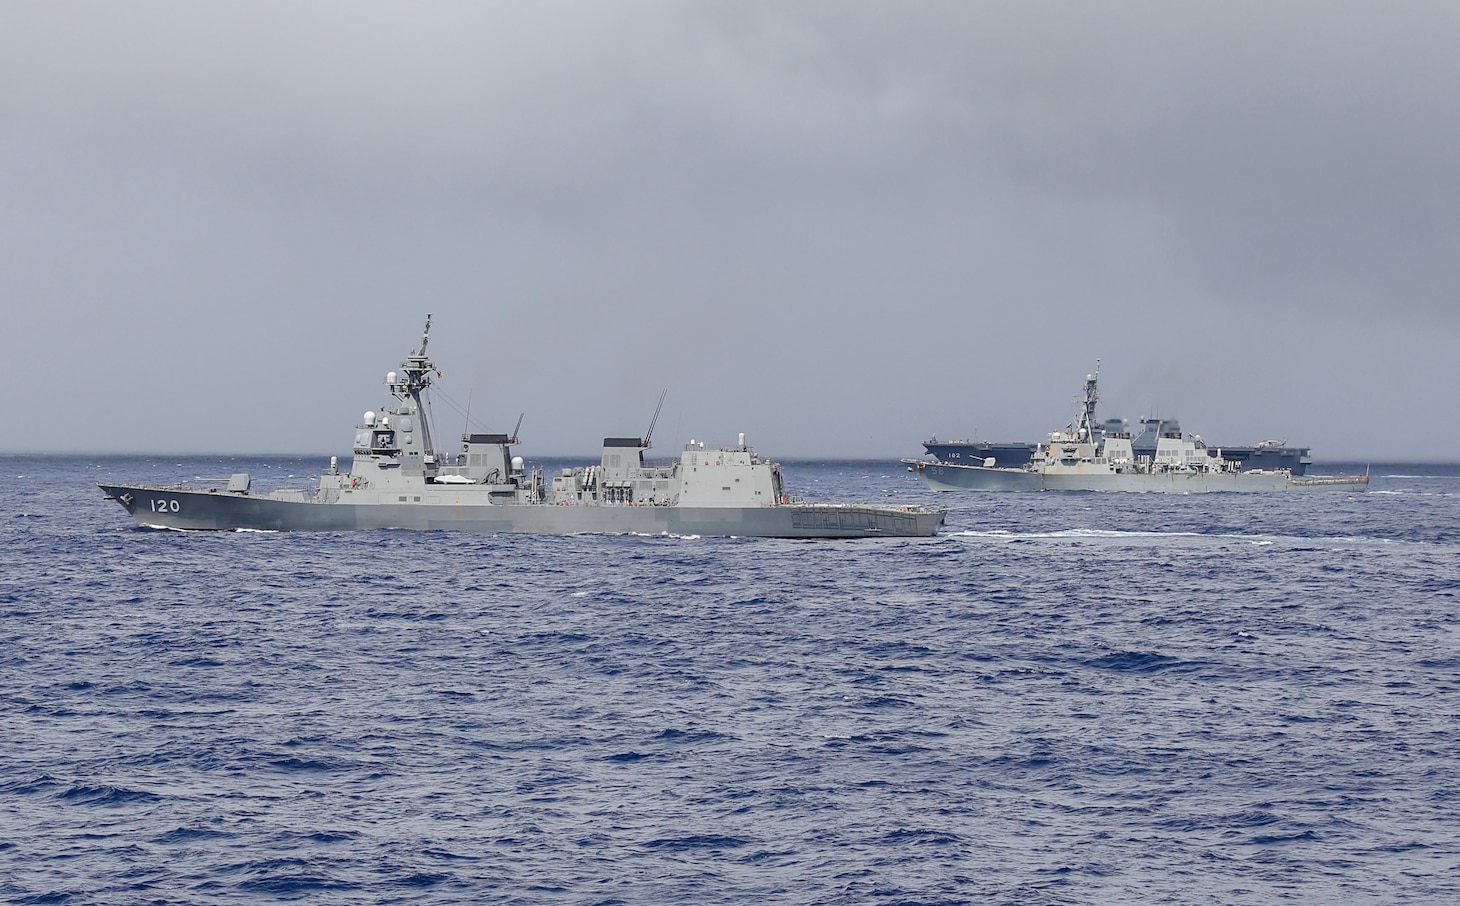 210303-N-FO714-1138 PHILIPPINE SEA (March 3, 2021) - The Arleigh Burke-class guided-missile destroyer USS John S. McCain (DDG 56), the Japan Maritime Self-Defense Force guided-missile destroyer JS Shiranui (DDG 120) and helicopter destroyer JS Ise (DDH 182) sail in formation during the annual U.S.-Japan Bilateral Advanced Warfighting Training Exercise. BAWT focuses on joint training and interoperability of coalition forces, and enables real-world proficiency and readiness in response to any contingency. (U.S. Navy photo by Mass Communication Specialist 2nd Class Deanna C. Gonzales)